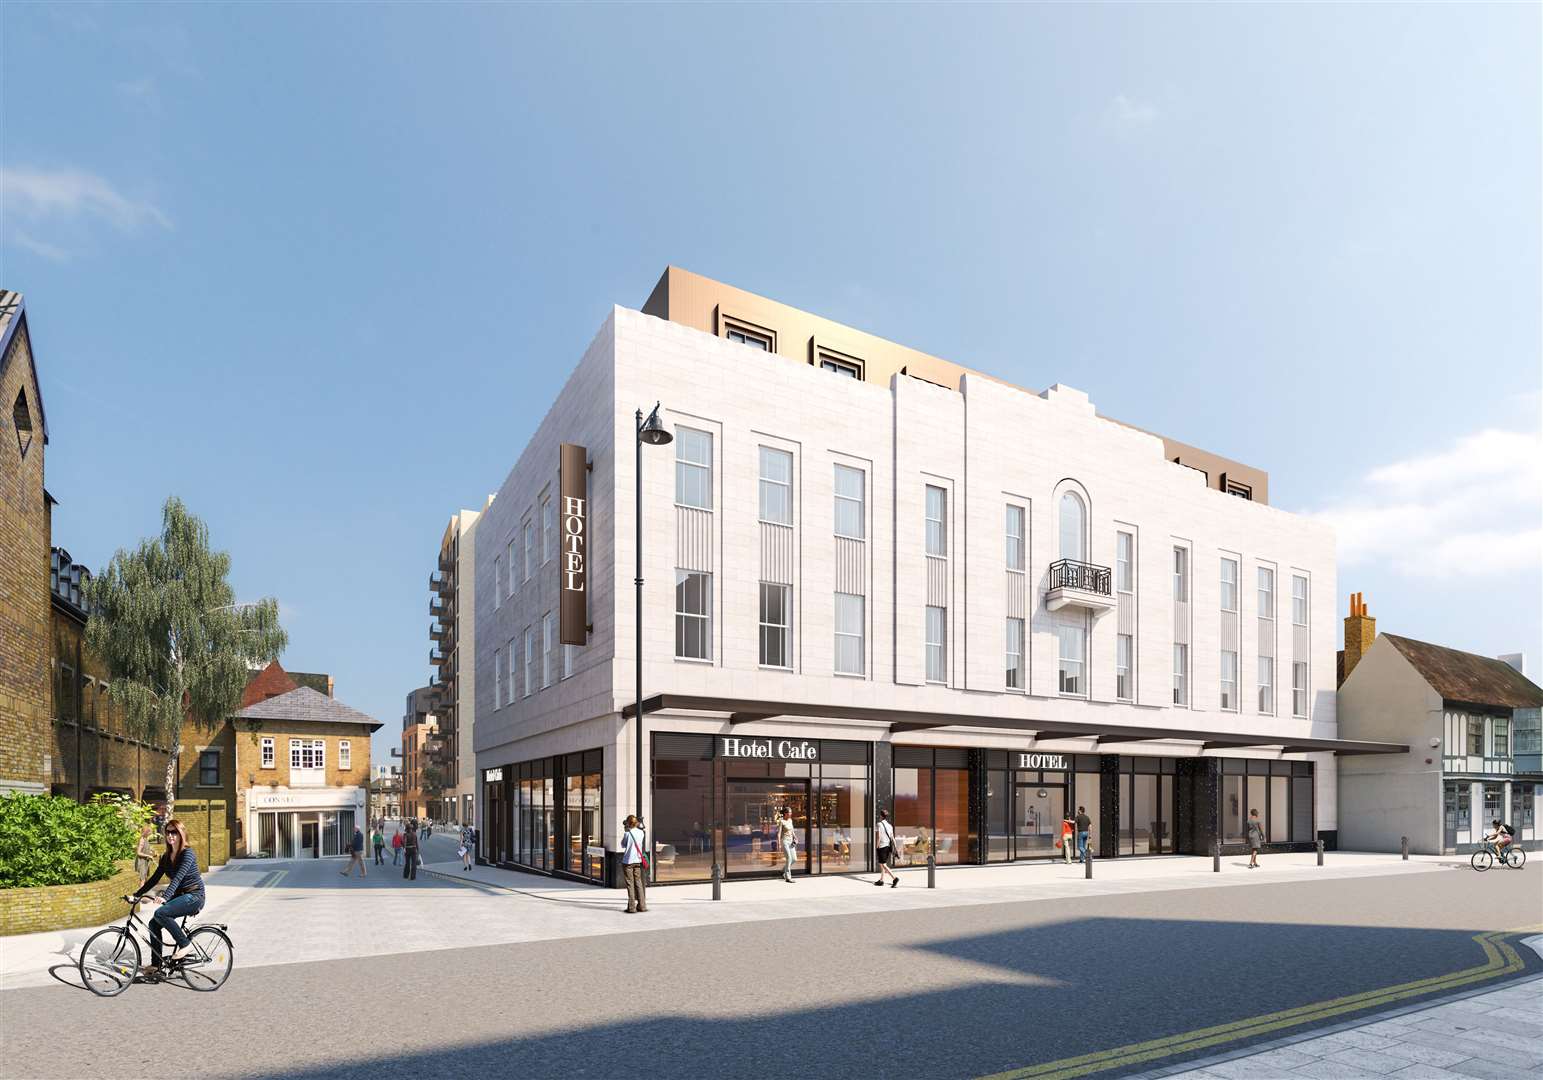 Under the plans, a new hotel will replace the former Co-Operative building in Spital Street on the corner of Orchard Street